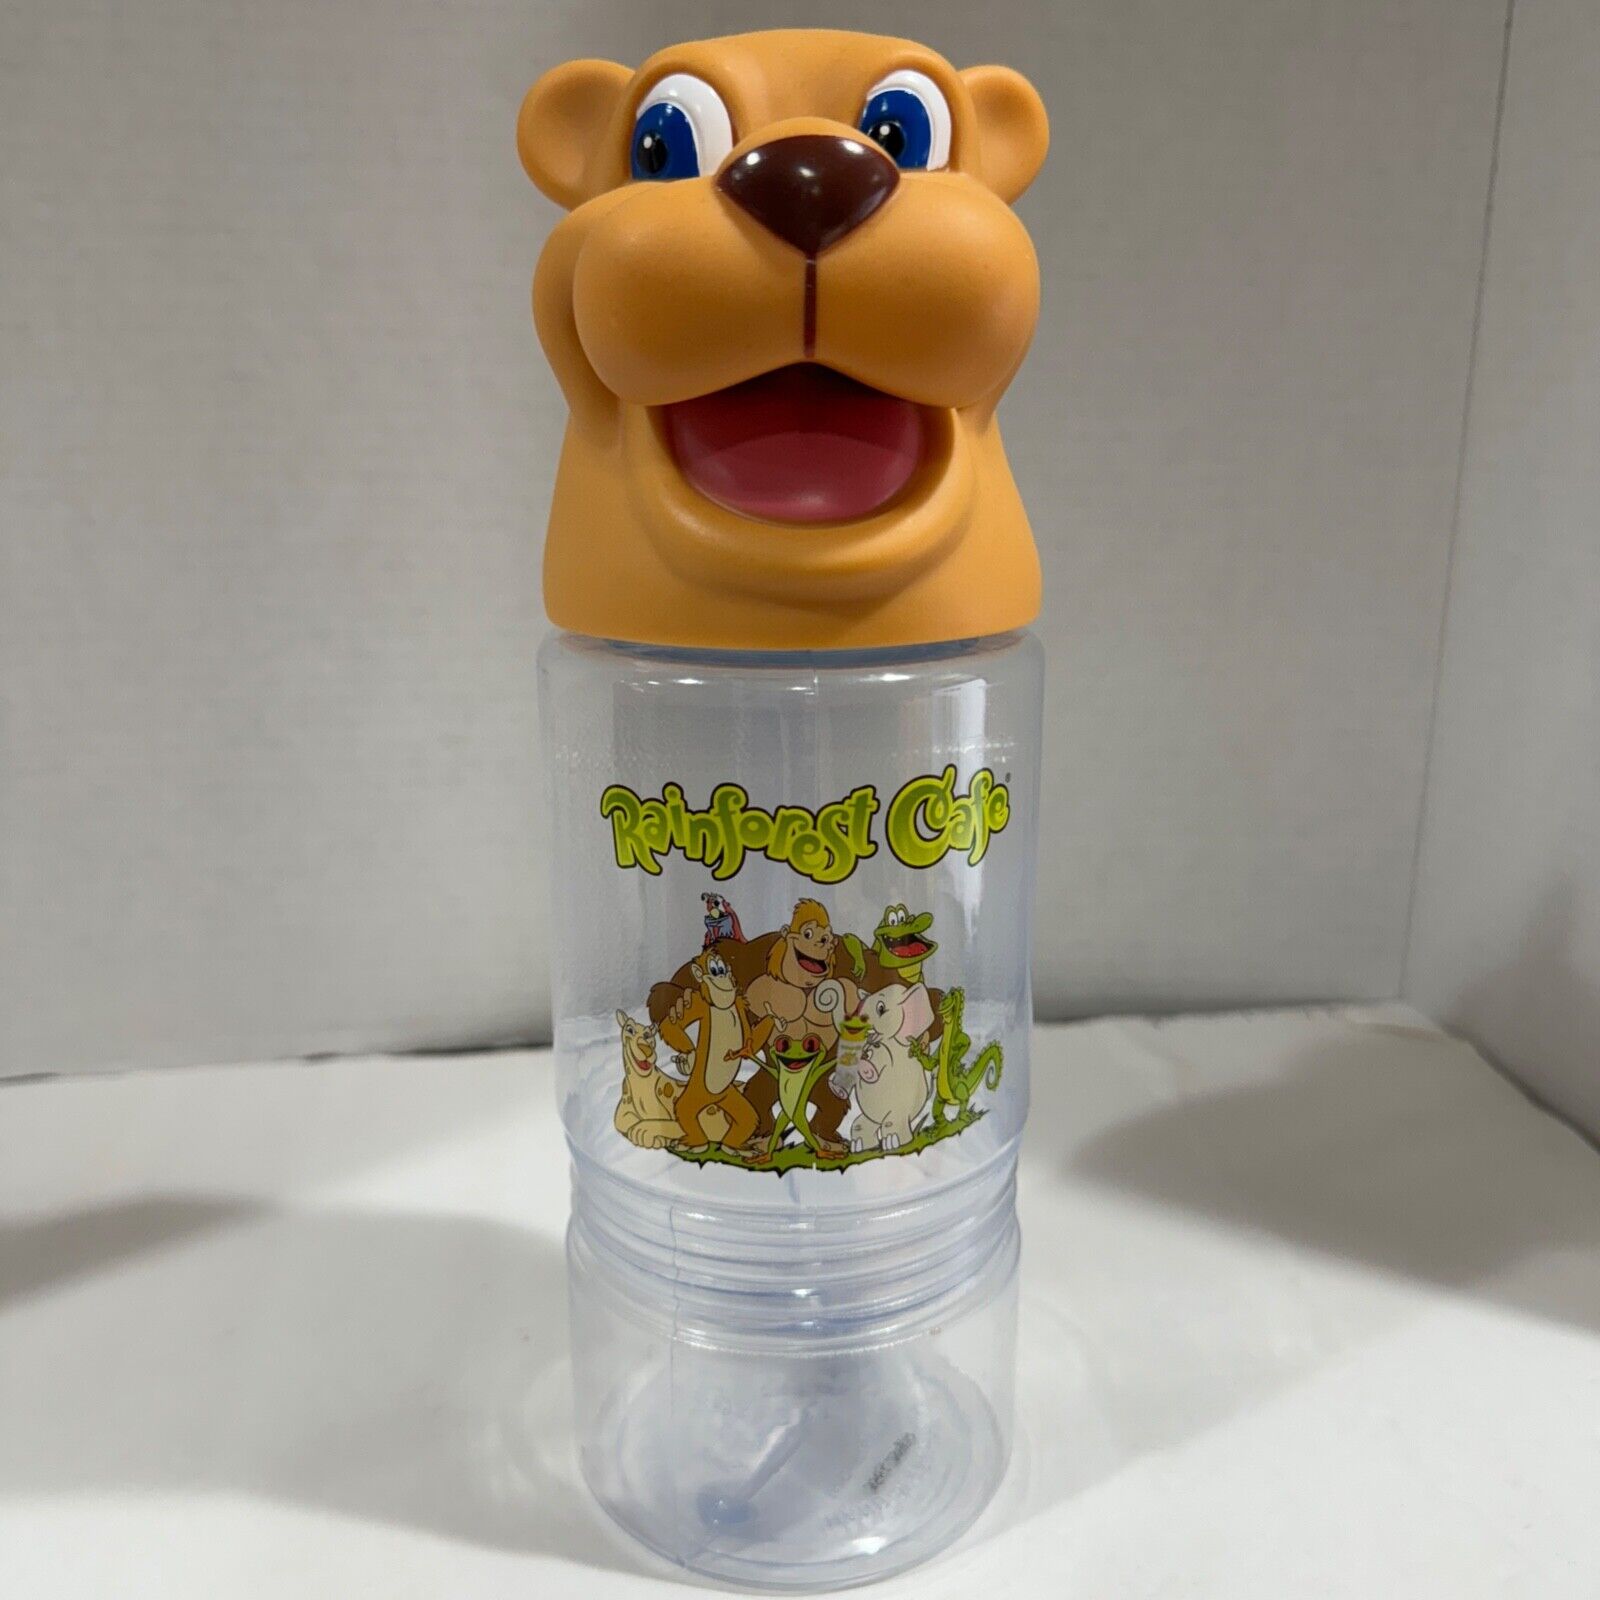 VINTAGE Rainforest Cafe CHEETAH Cup And Snack Cup Holder --NO STRAW